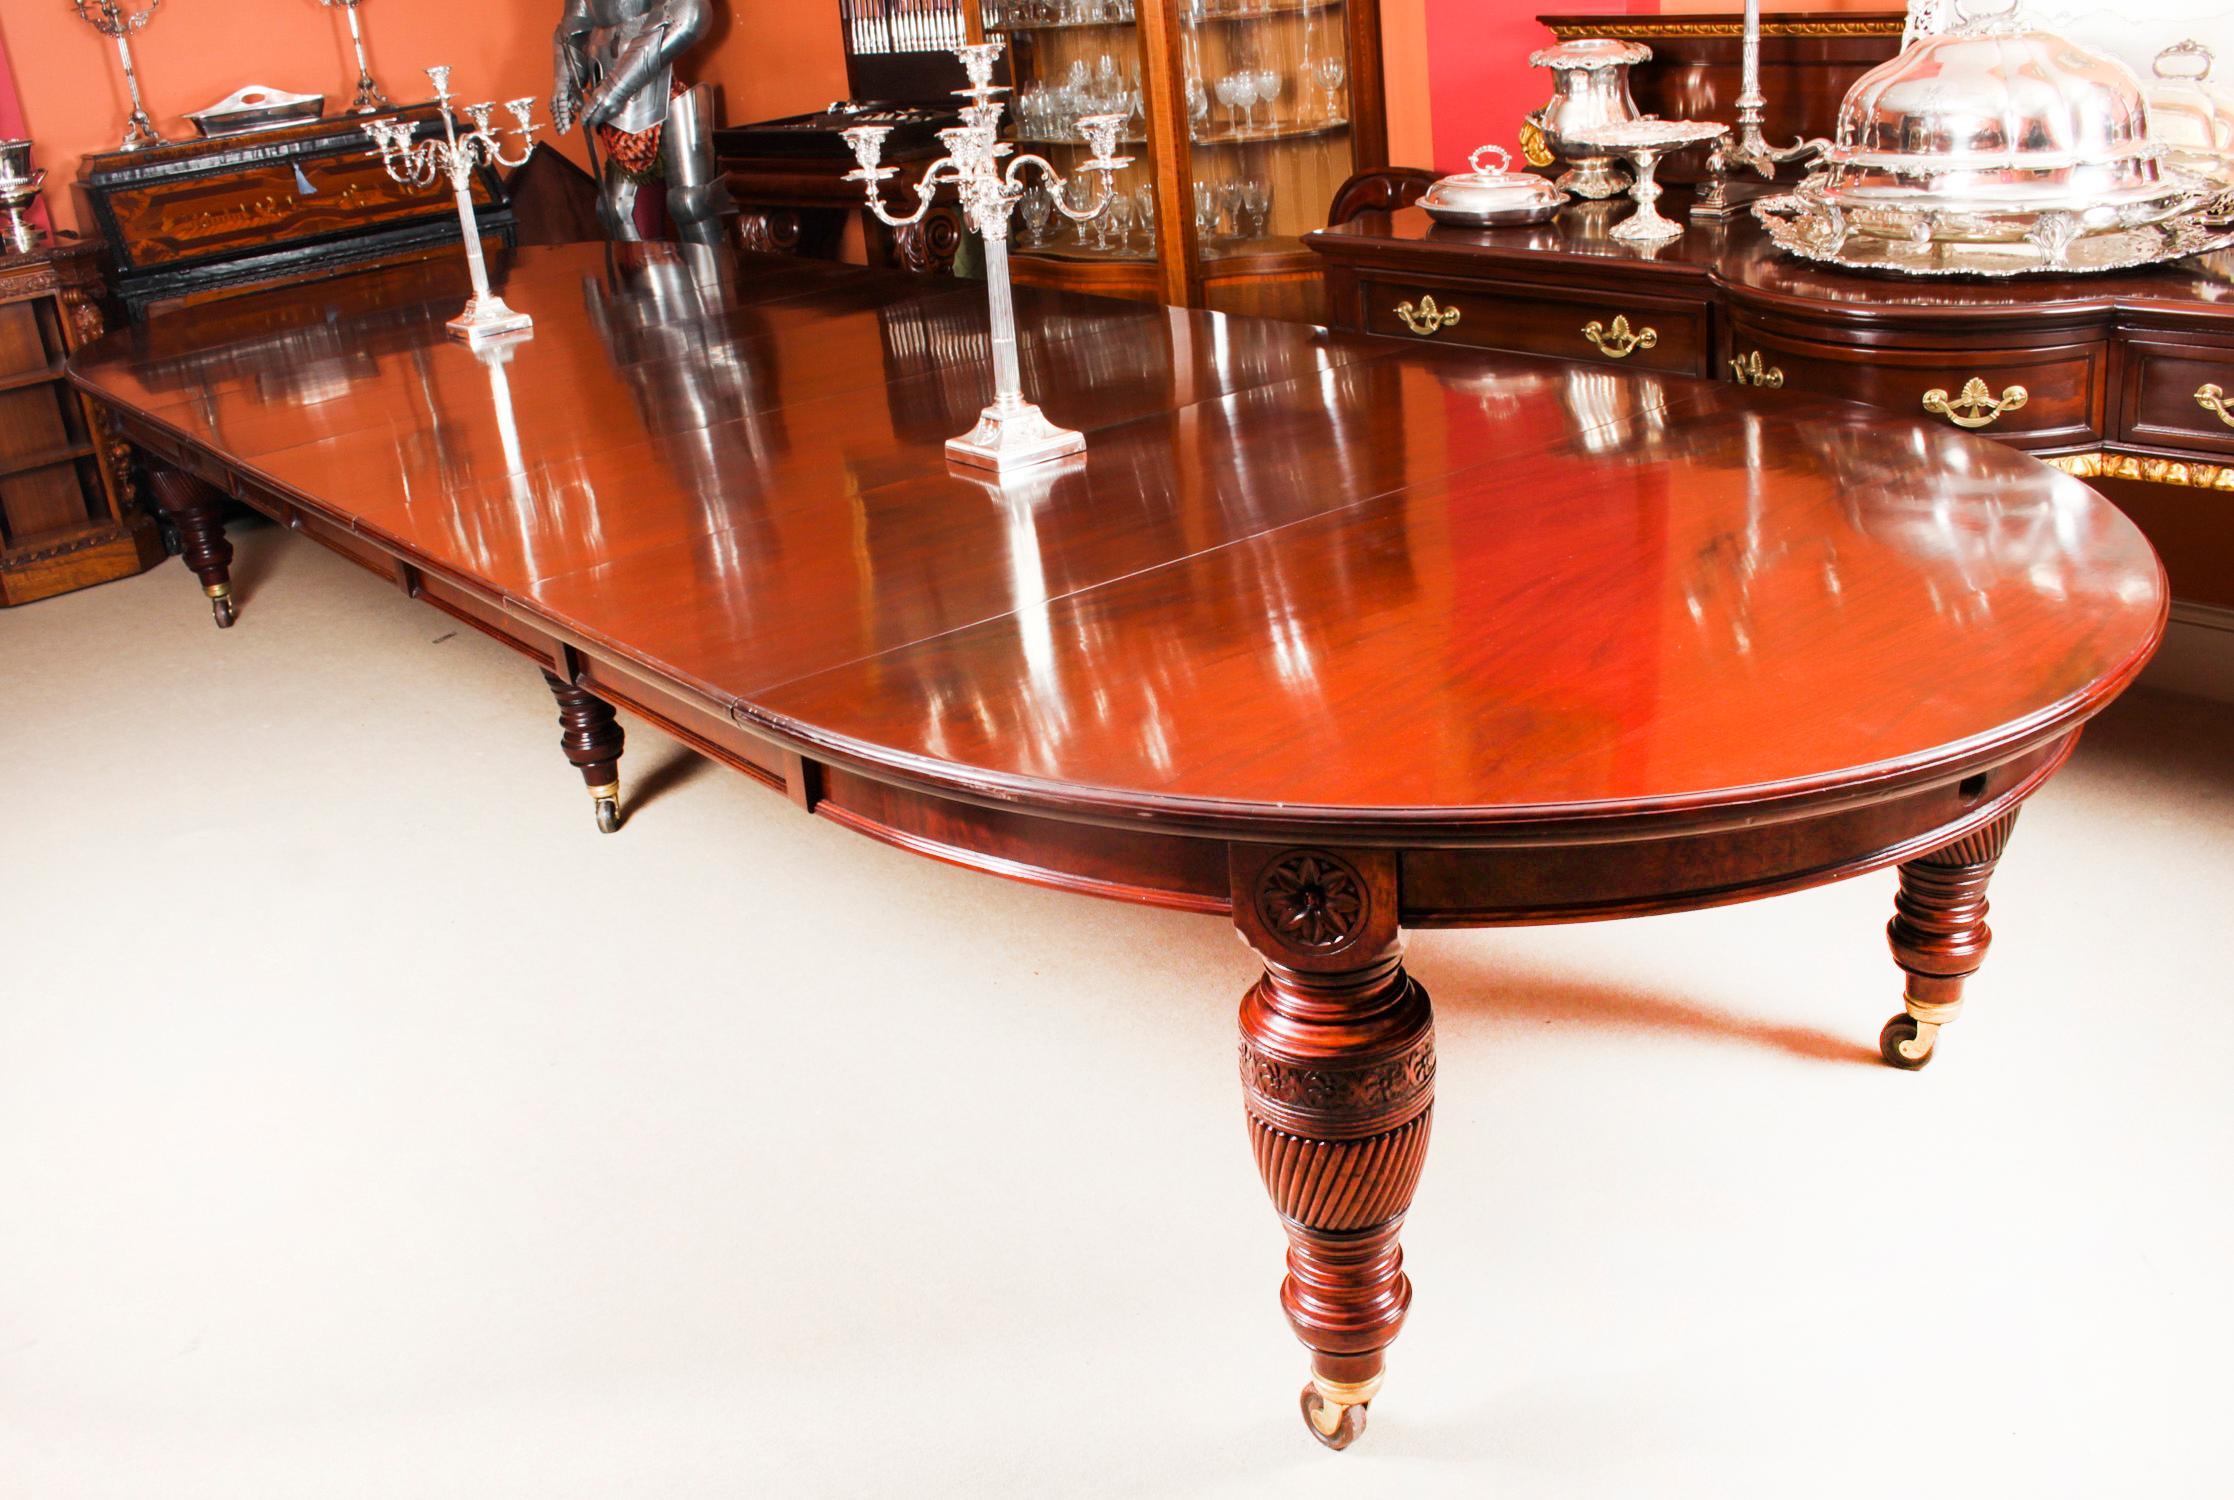 This is a beautiful antique late Victorian flame mahogany extending dining table, circa 1880 in date.
This amazing table can seat sixteen people in comfort and has been hand-crafted from beautiful solid flame mahogany.

The beautifully figured flame